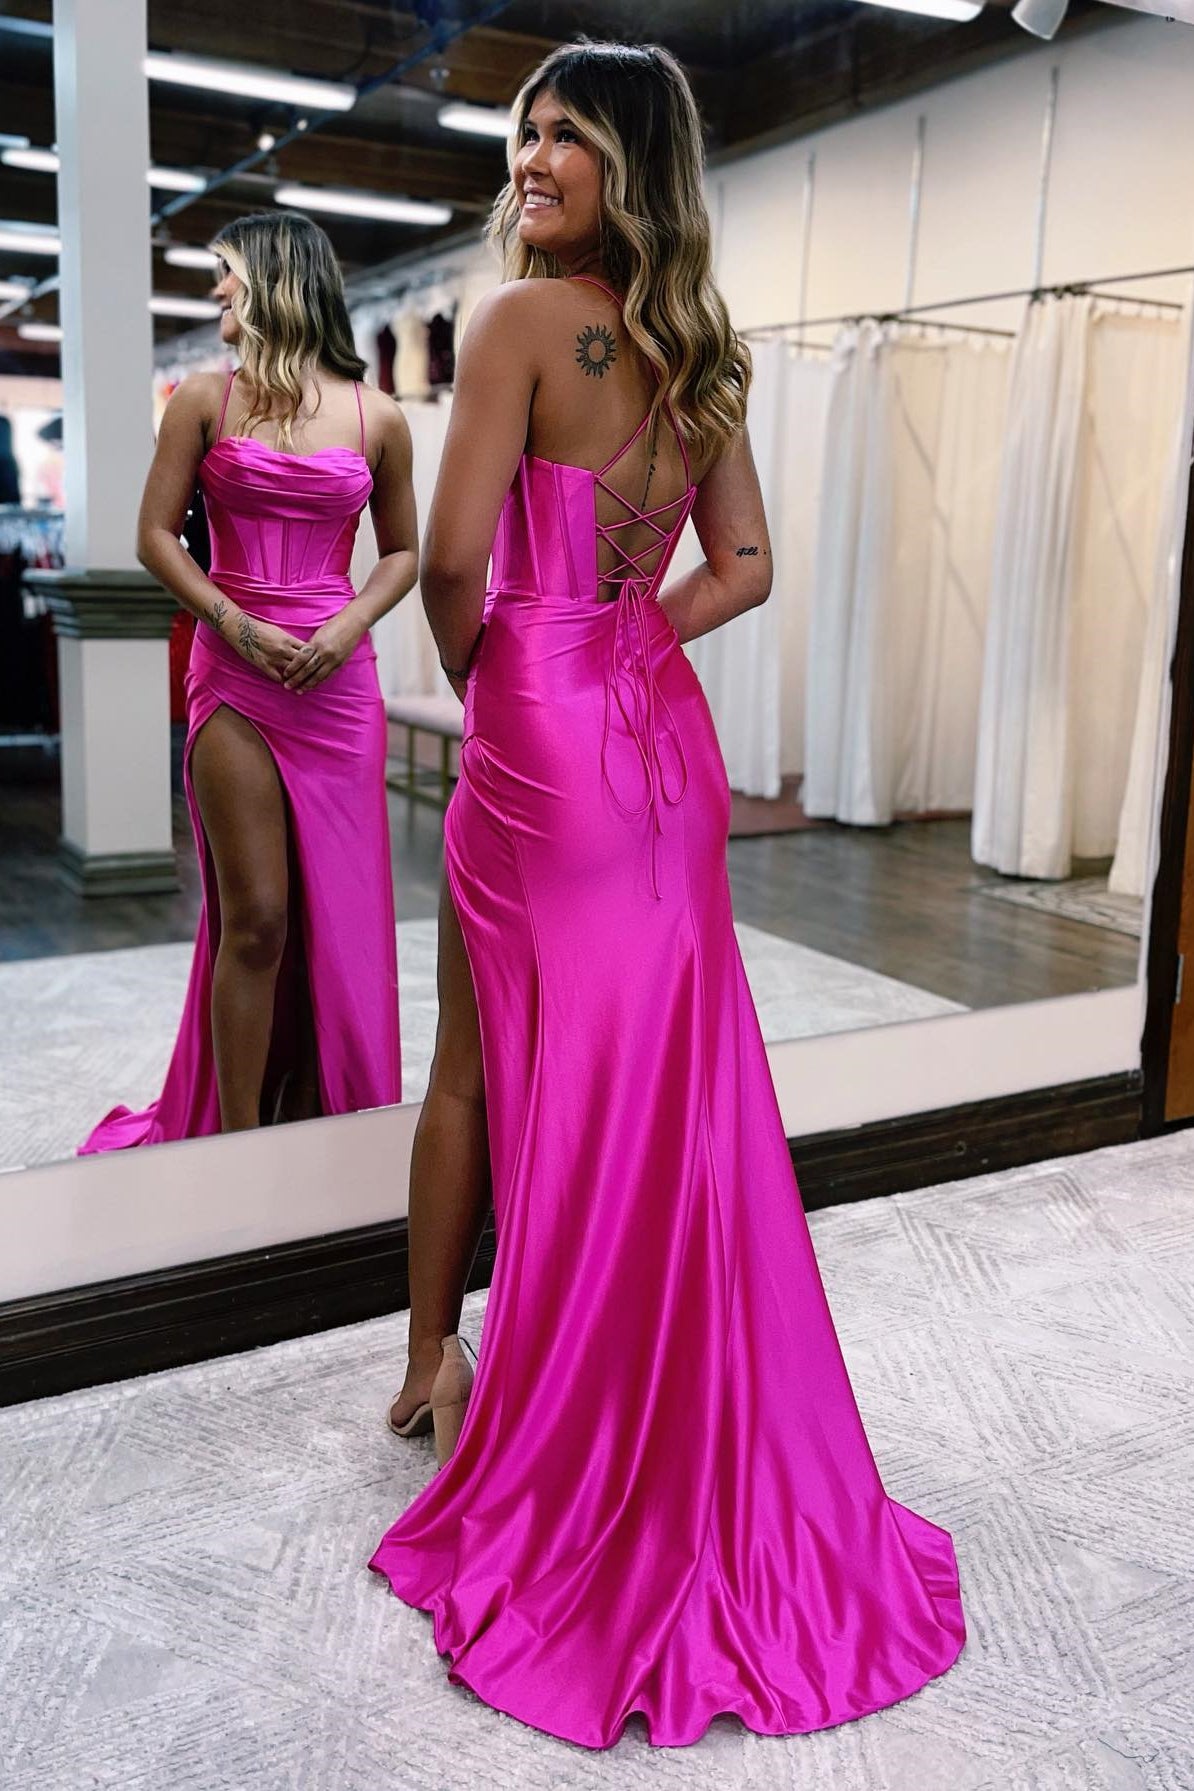 Hot Pink Tulle A Line Pink Prom Dresses 2023 With V Neck, Long Spaghetti  Straps, And Slit Detail Perfect For Formal Evening Parties, Graduations, Or  Parties From Meetyy, $57.69 | DHgate.Com